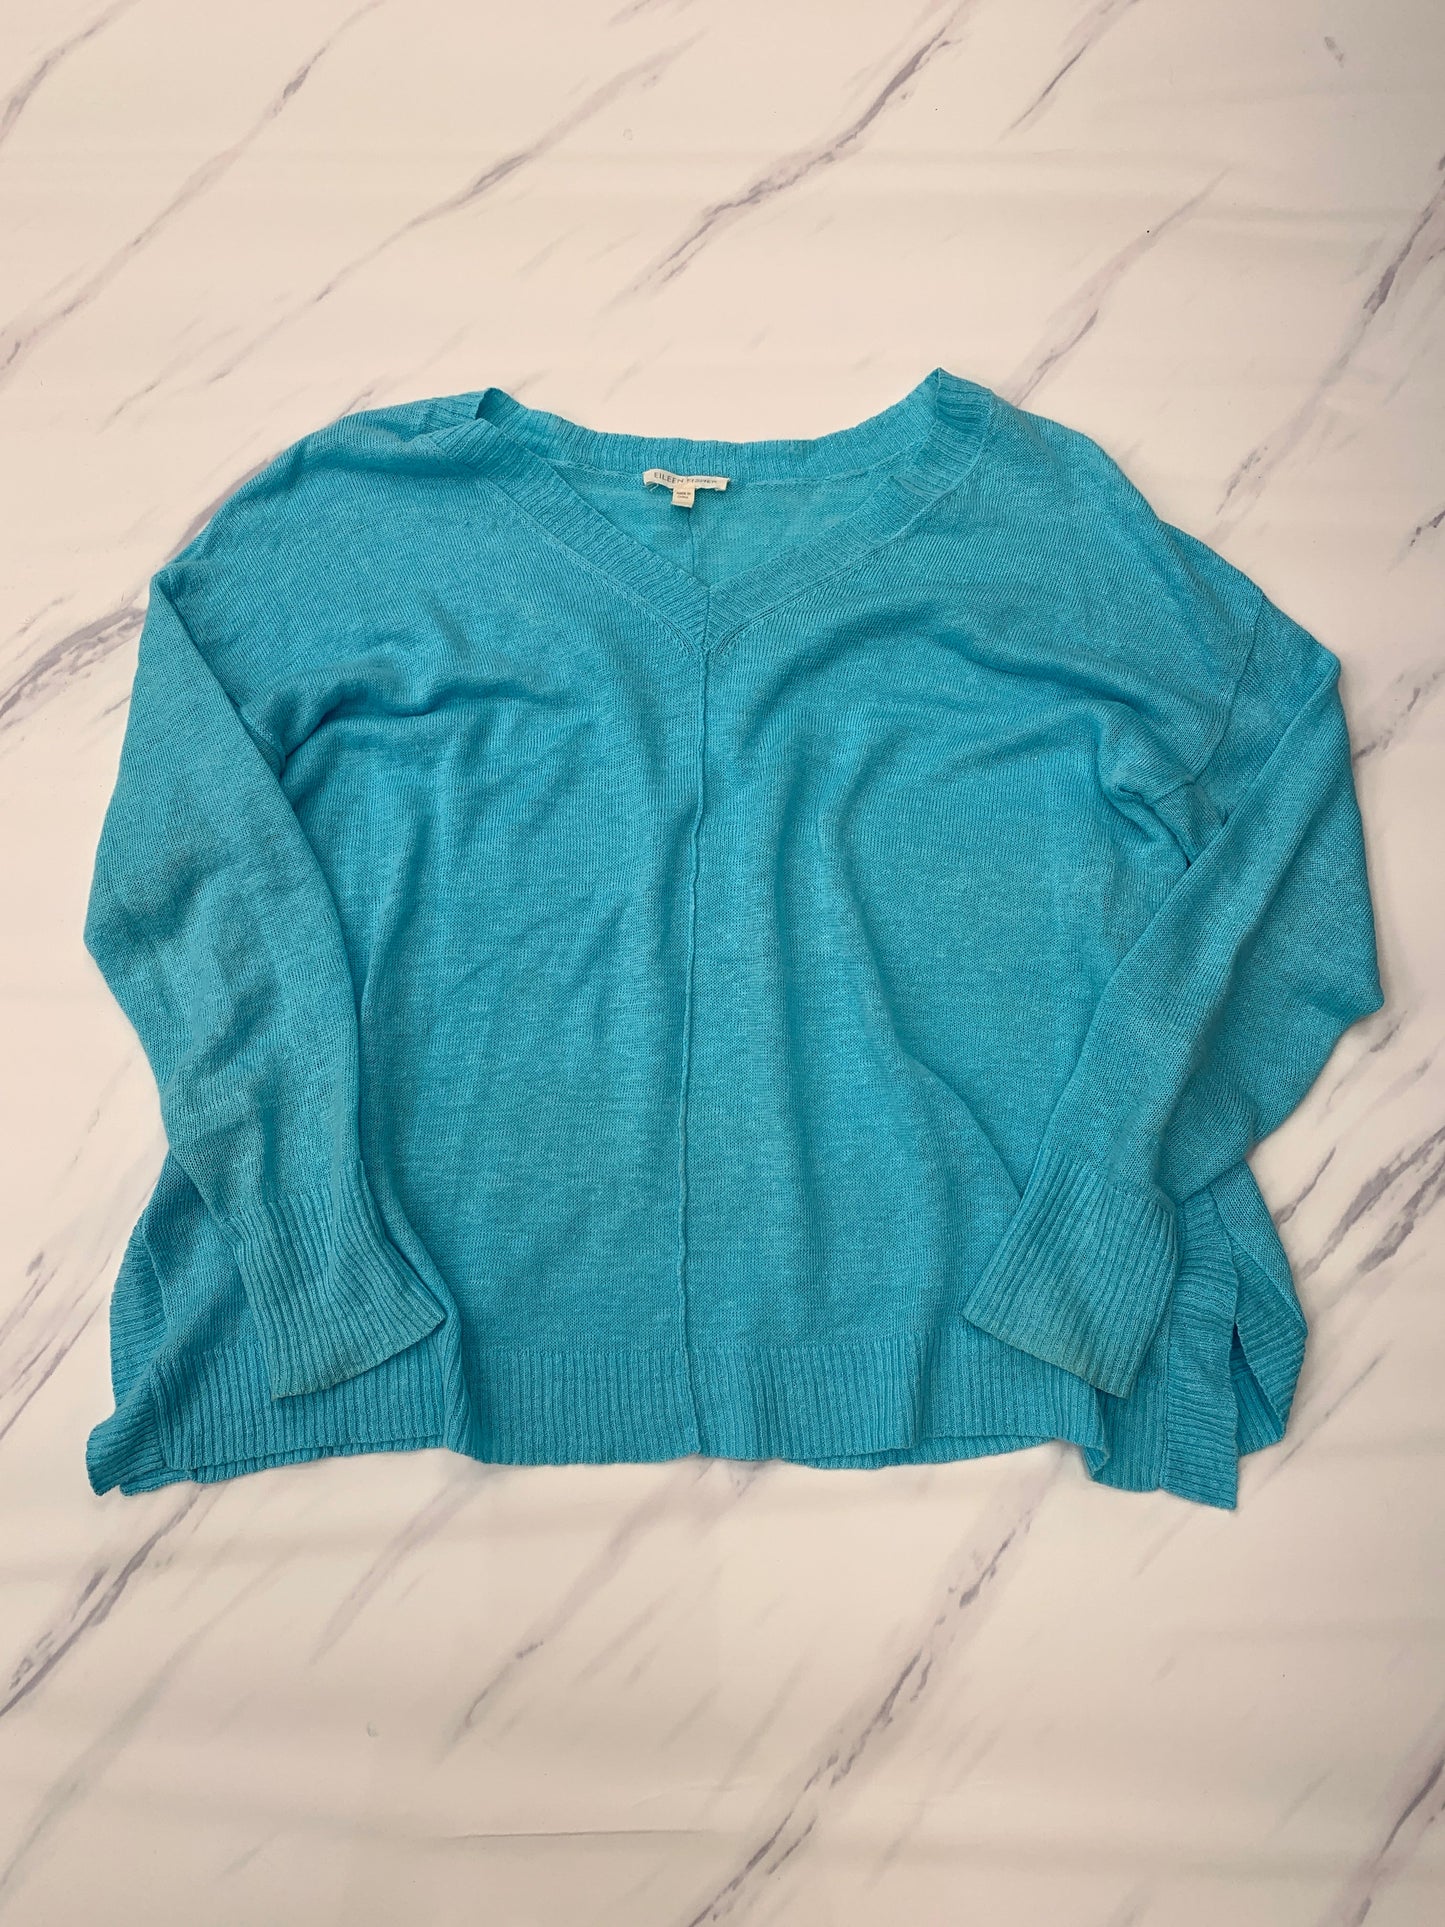 Sweater Eileen Fisher, Size M